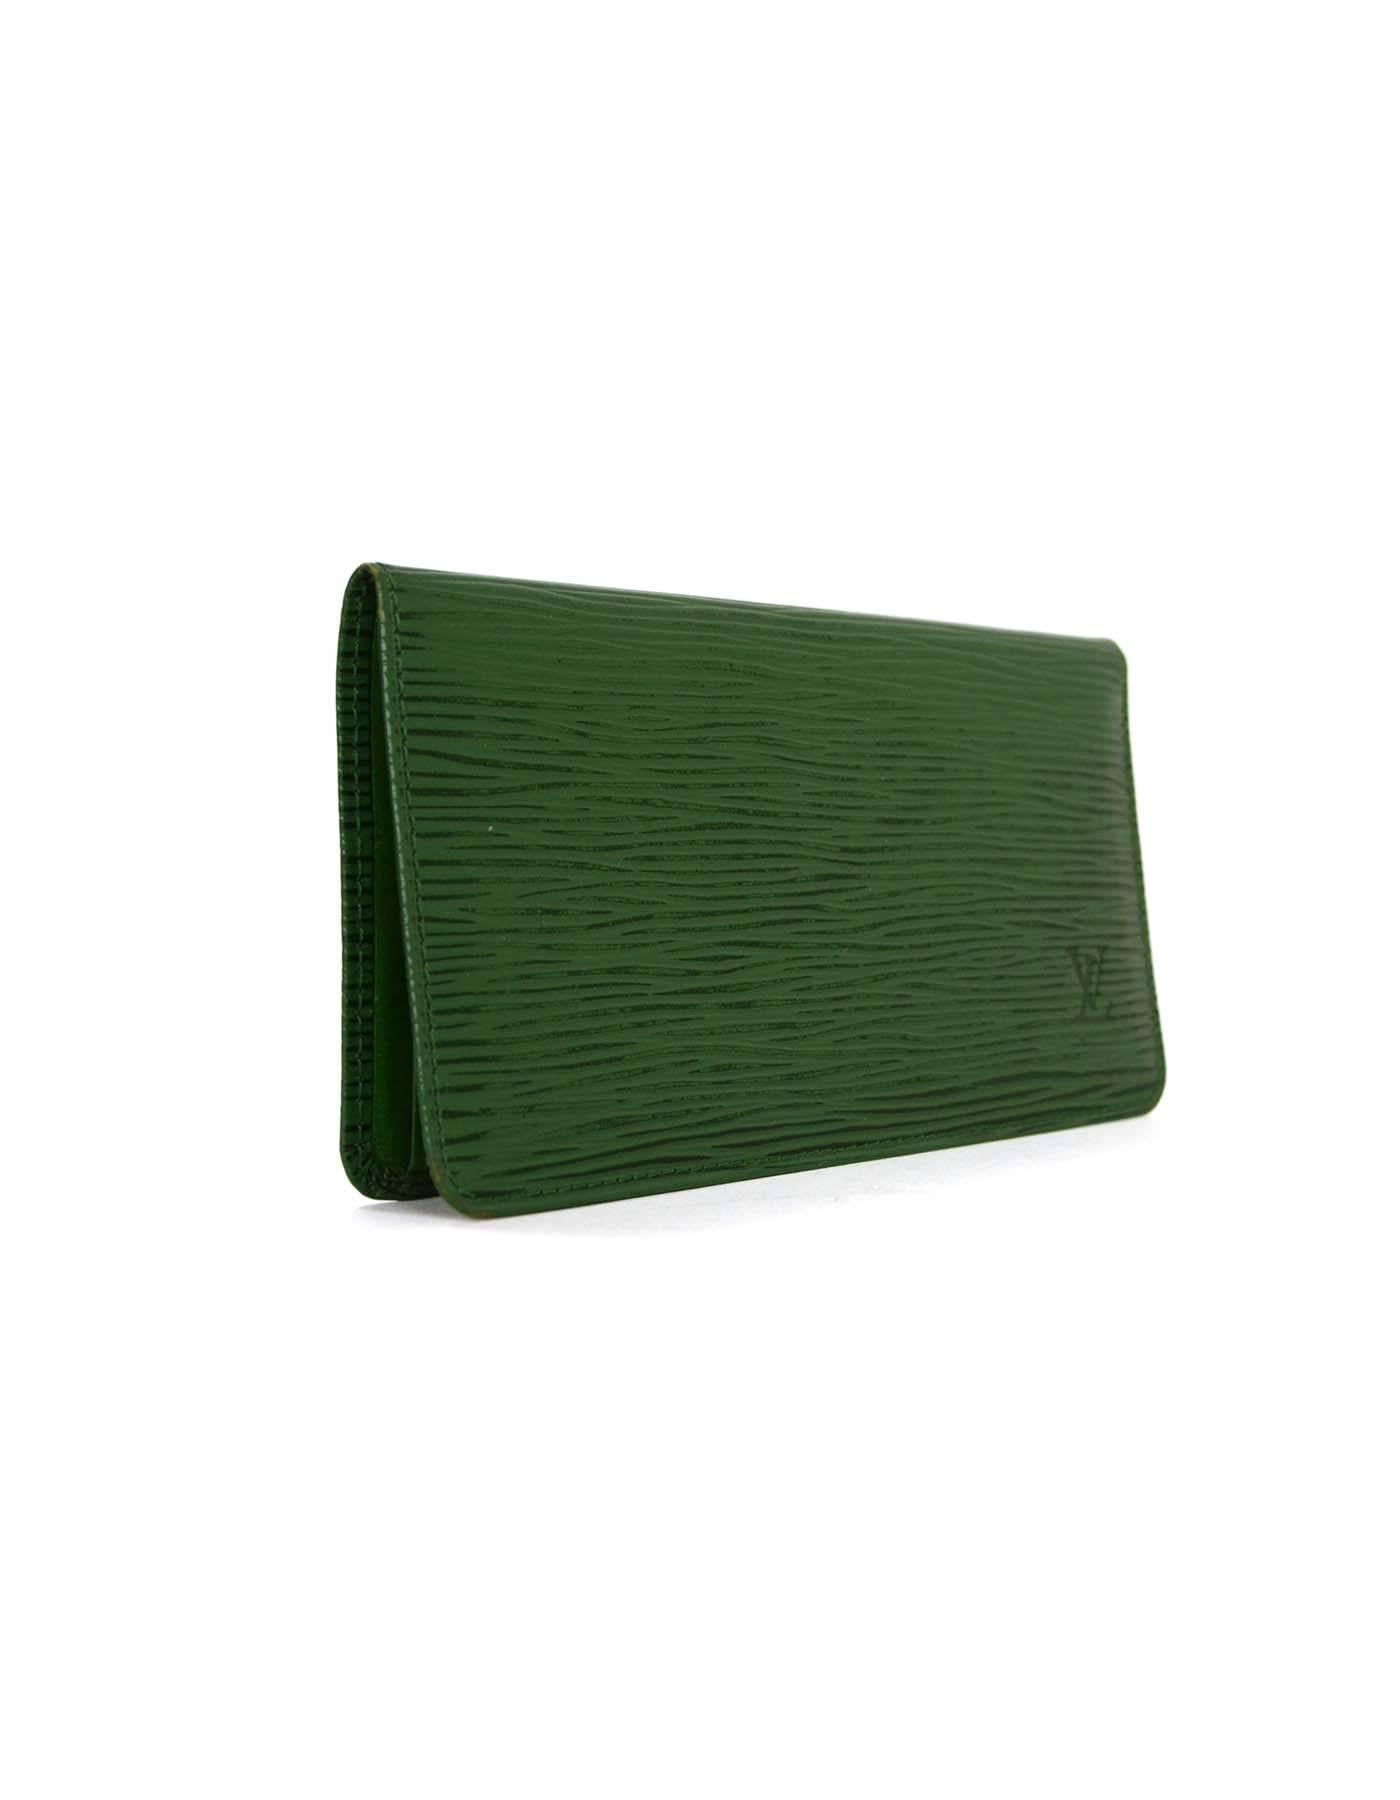 Louis Vuitton Vintage '90 Green Epi Checkbook Holder 
Features LV imprinted on front right bottom corner
Made In: Spain
Year of Production: 1990
Color: Green
Materials: Epi leather
Lining: Green leather
Closure/Opening: Bi-fold
Exterior